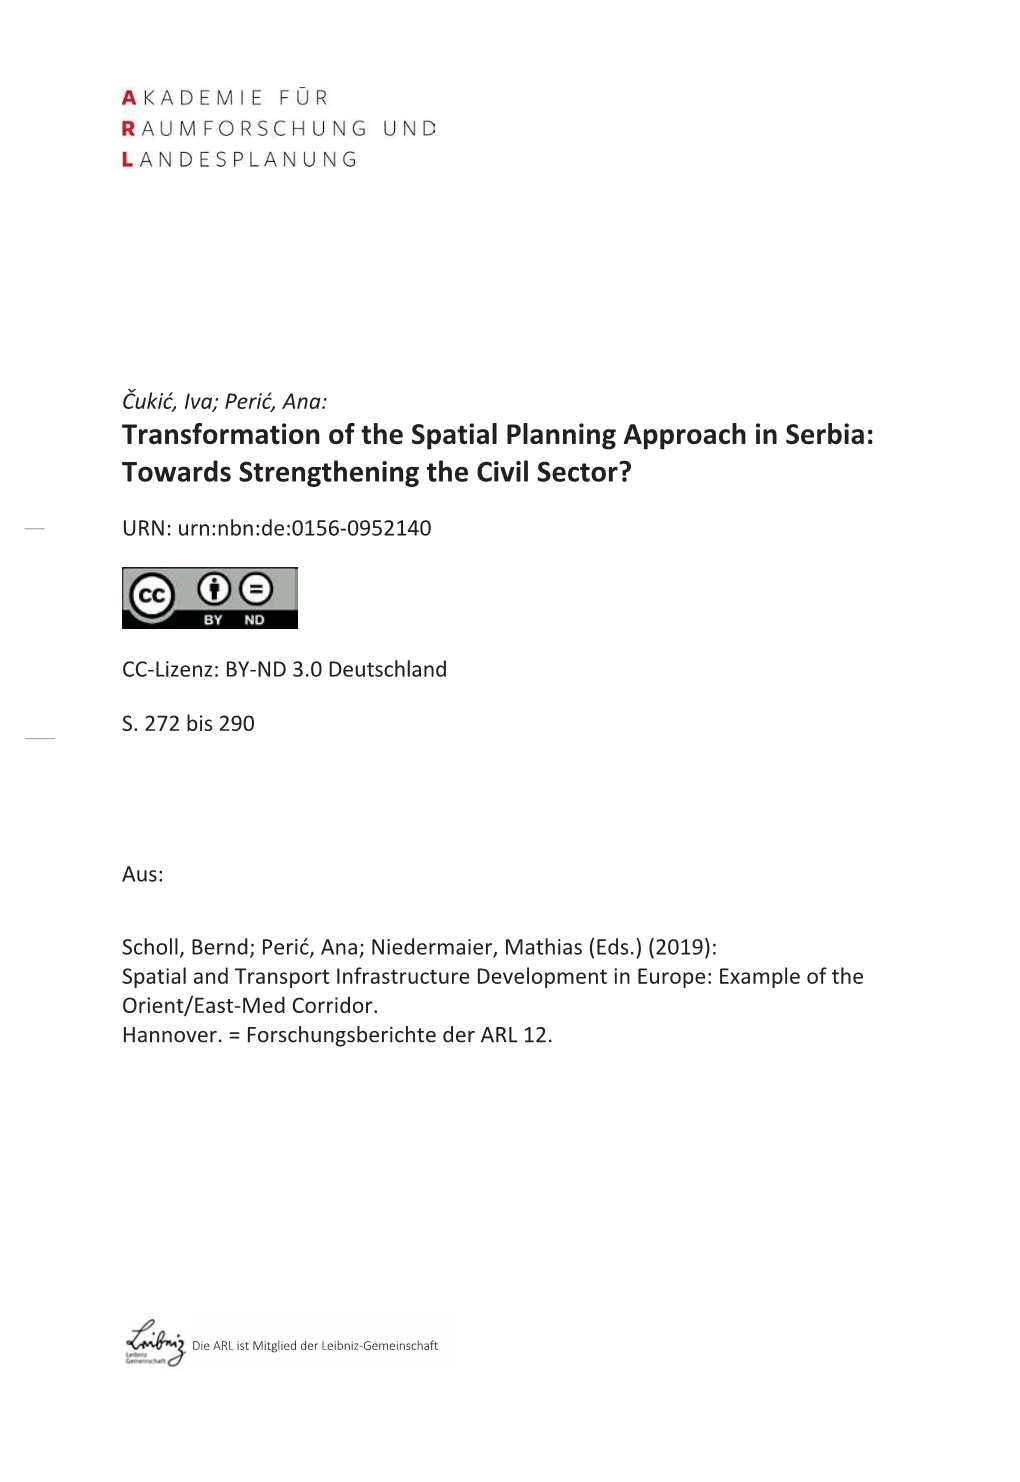 Transformation of the Spatial Planning Approach in Serbia: Towards Strengthening the Civil Sector?